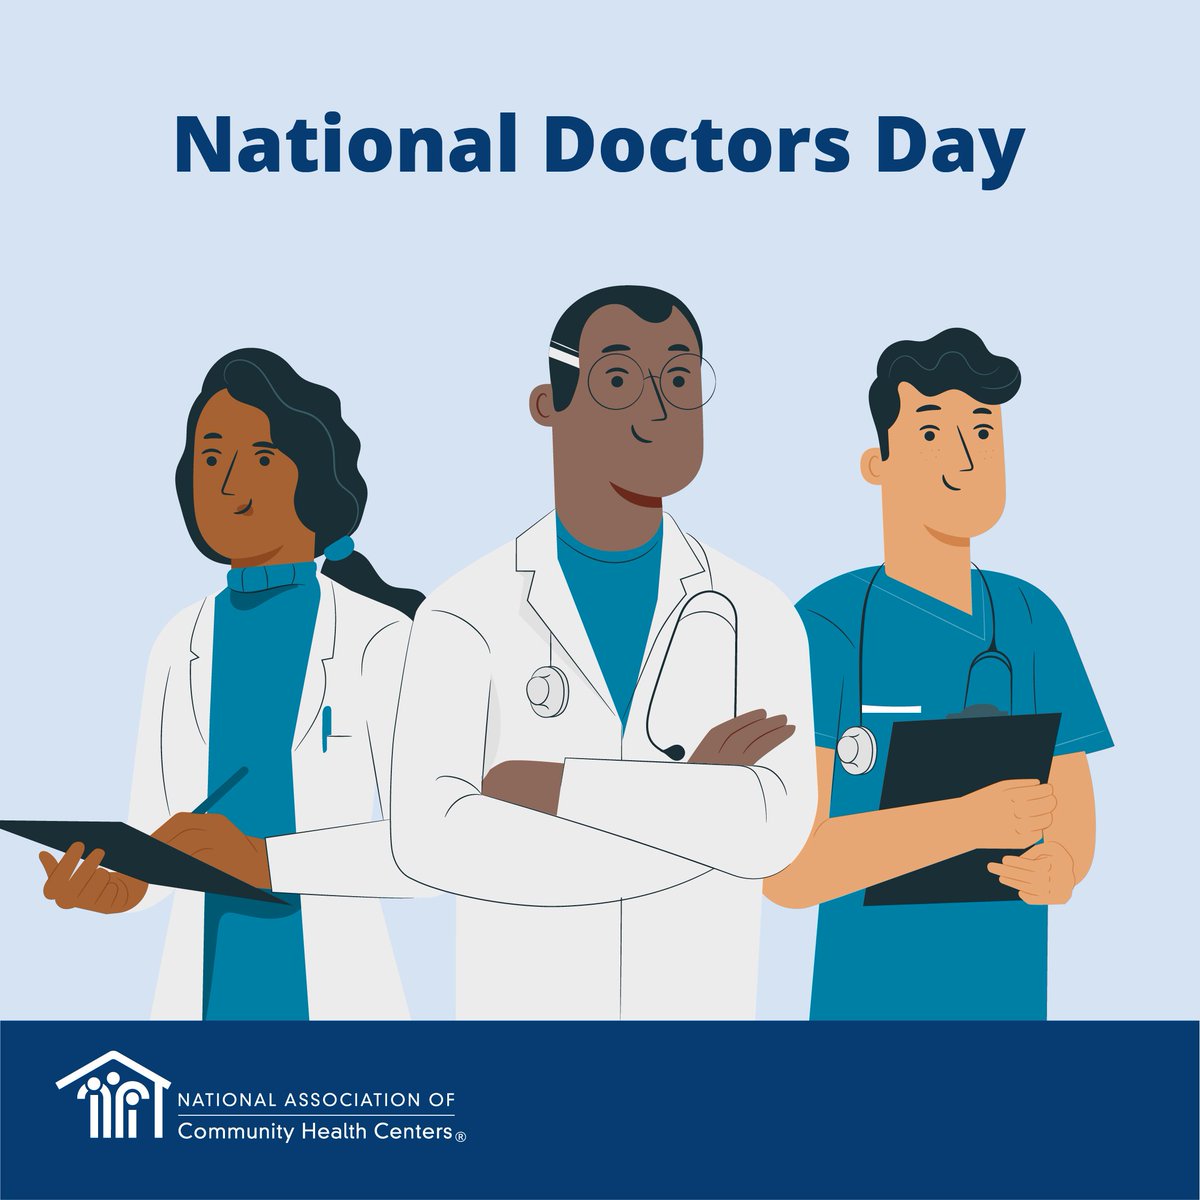 Happy National Doctors Day! We're lucky to work with so many talented doctors in our Dimock Family who are dedicated to providing the highest quality care for our community and helping patients live their best, healthiest lives. ❤ #NationalDoctorsDay #TheDimockDifference